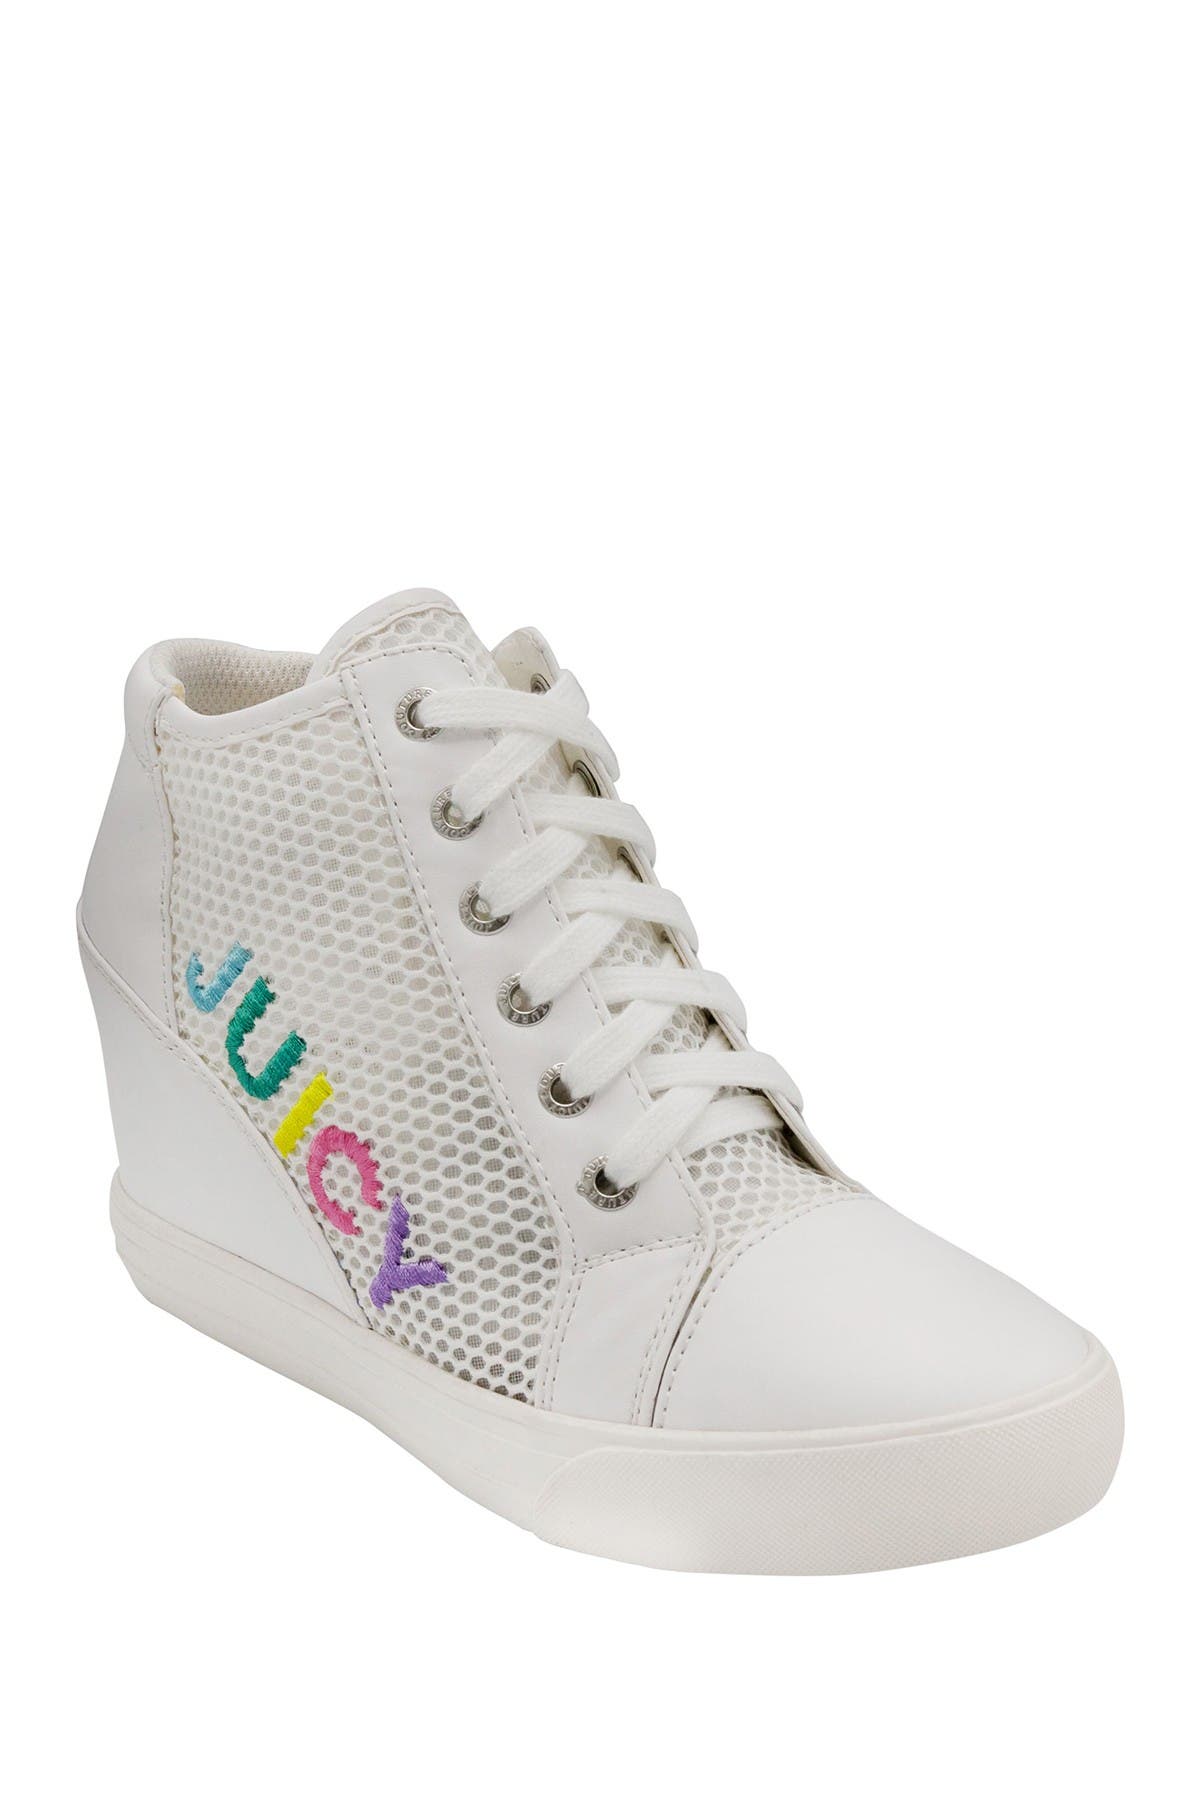 juicy couture shoes sneakers